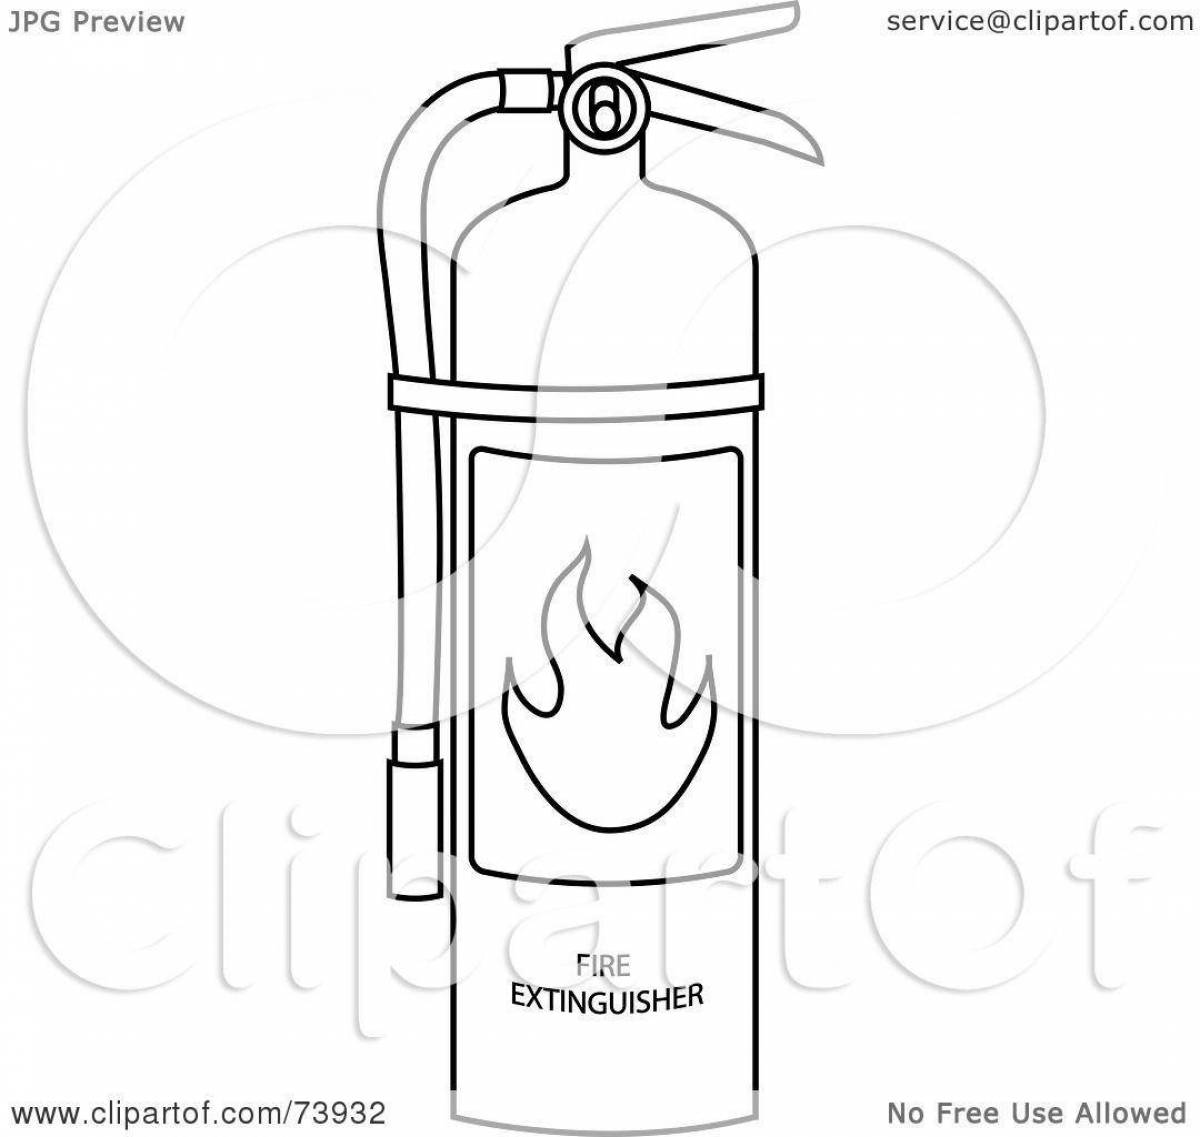 Adorable fire extinguisher coloring page for kids